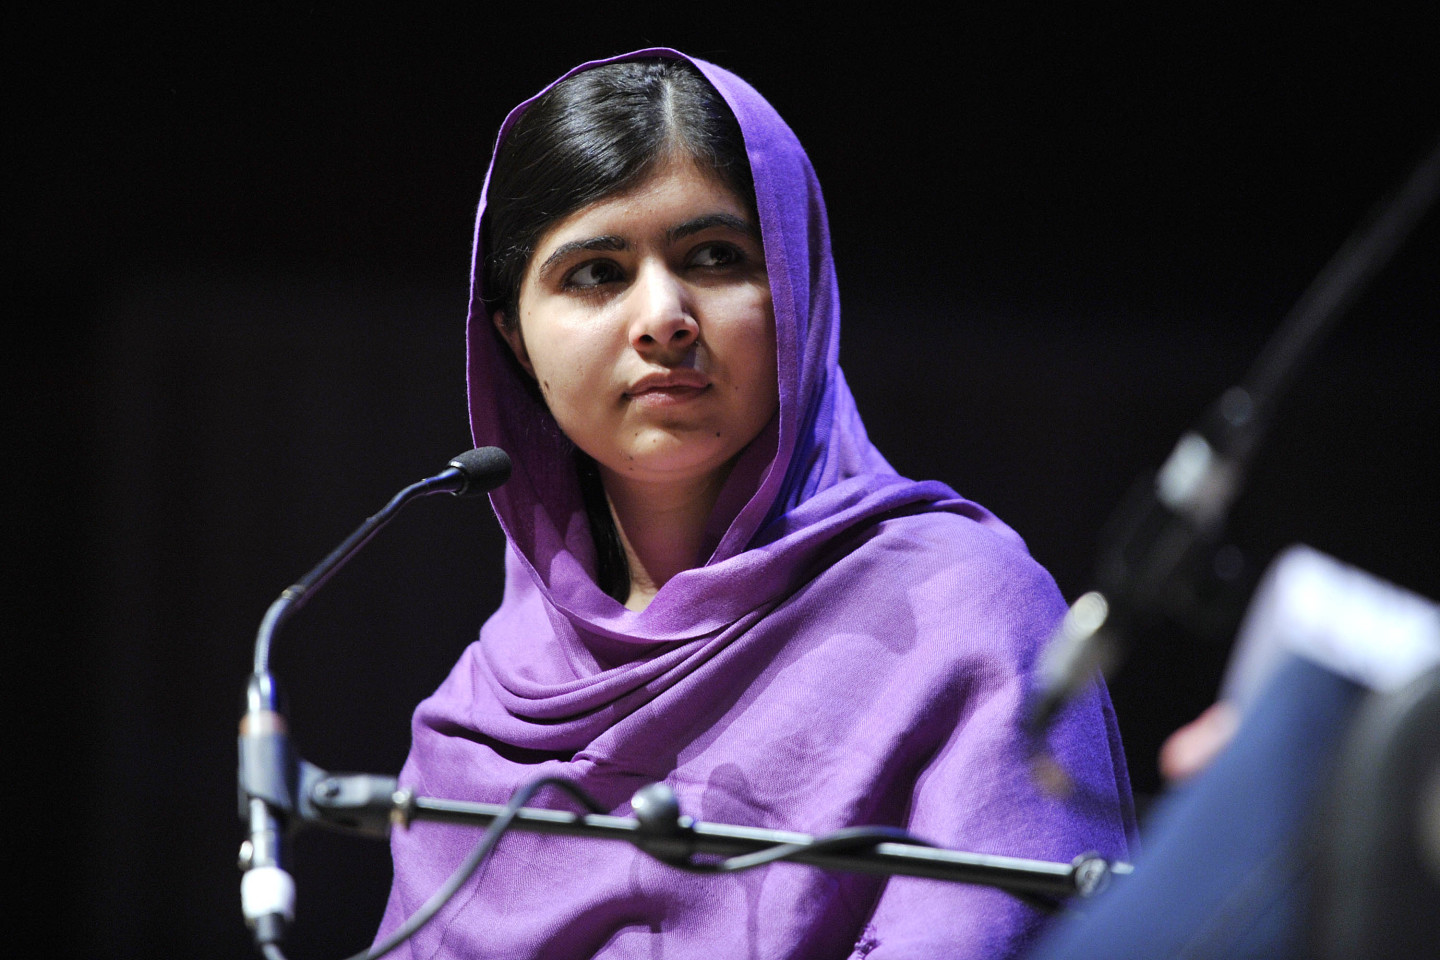 4 Lessons We Should All Learn from Malala Yousafzai